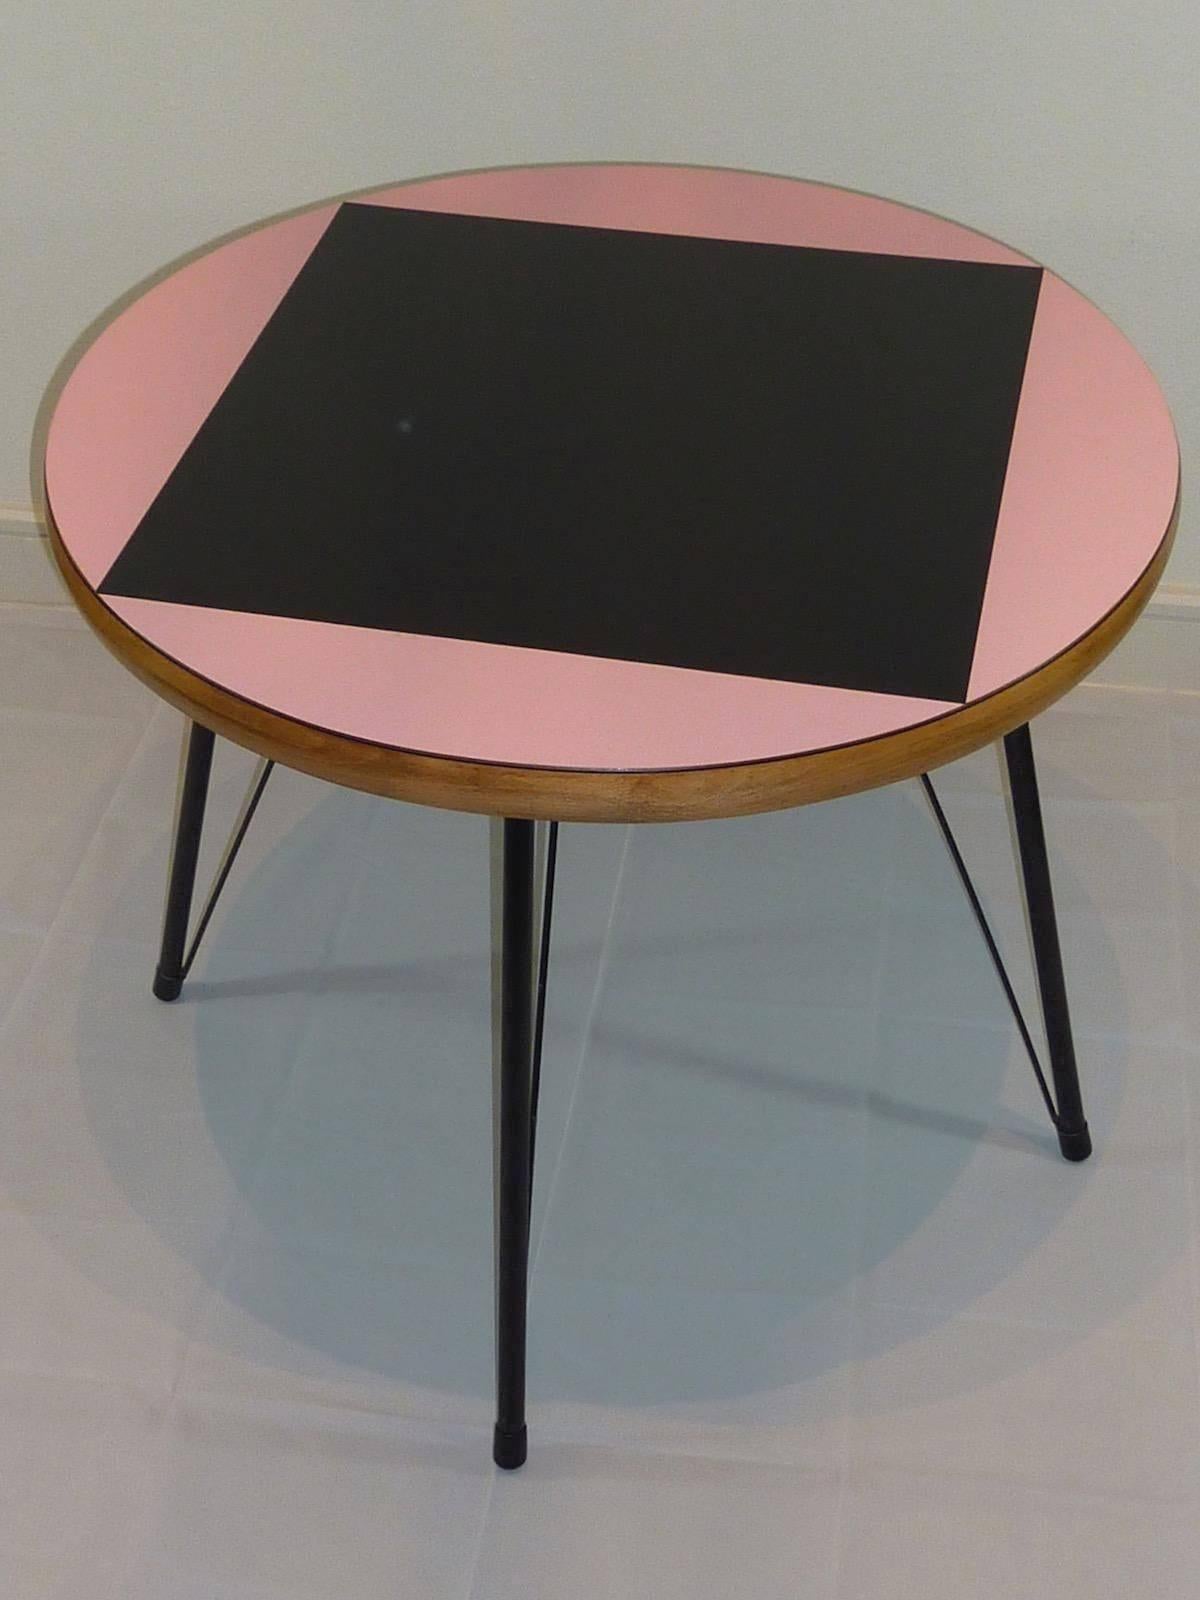 Mid-Century Modern Pink and Black Mid-Century Rockabilly Dining Table